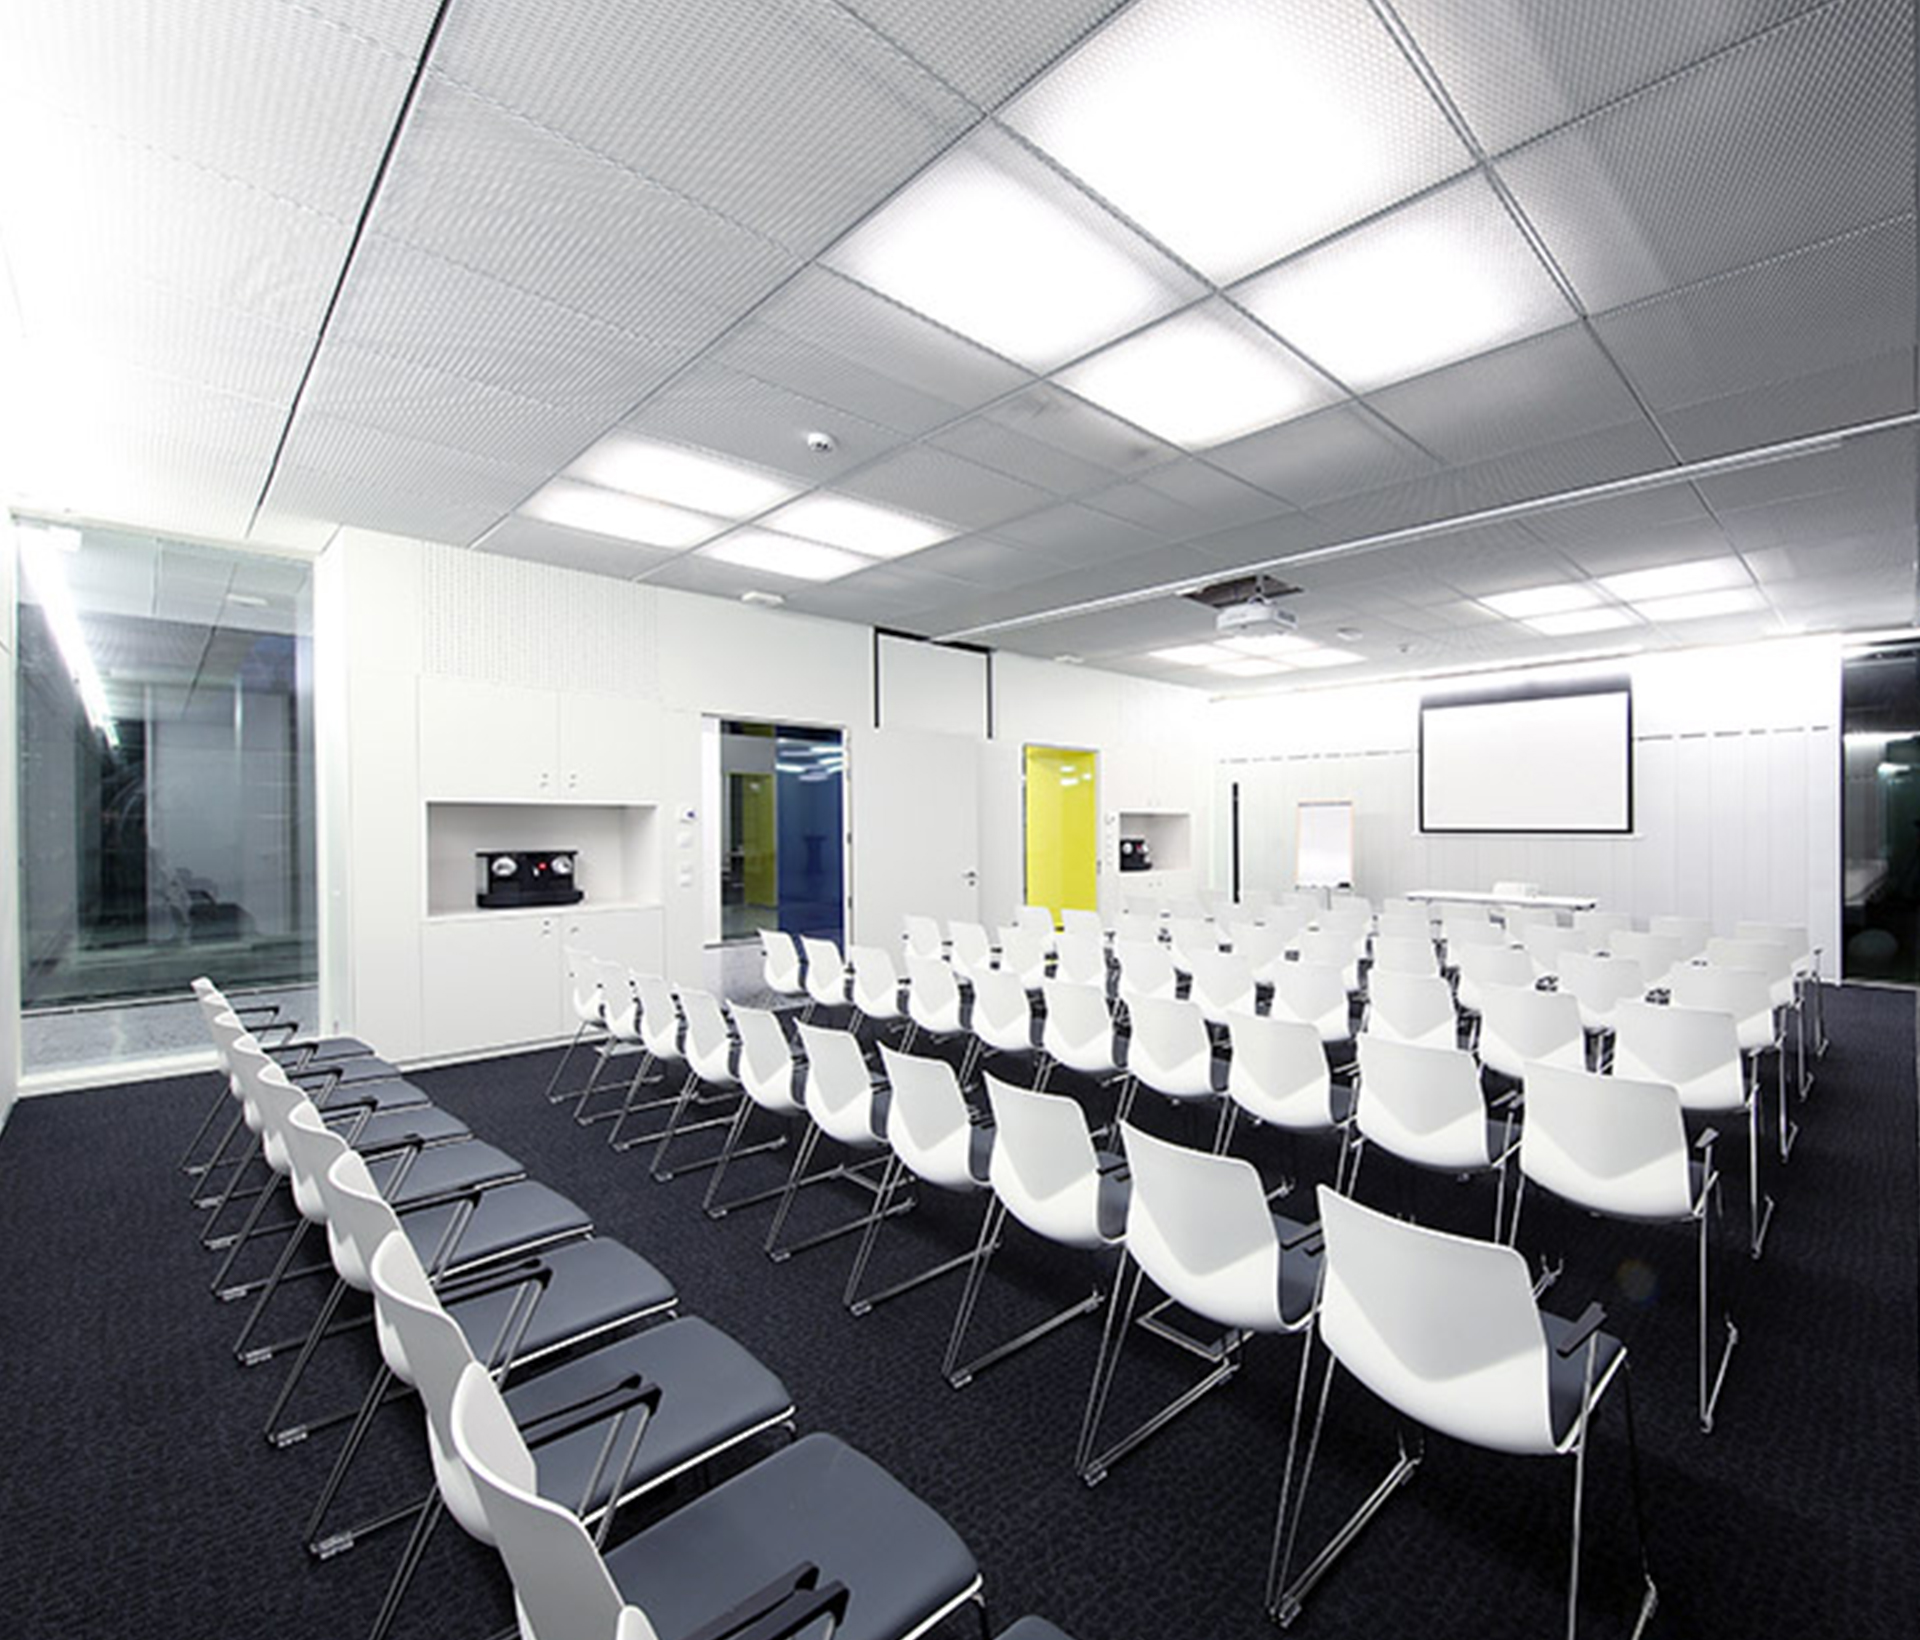 A conference room with white chairs and a projection screen.